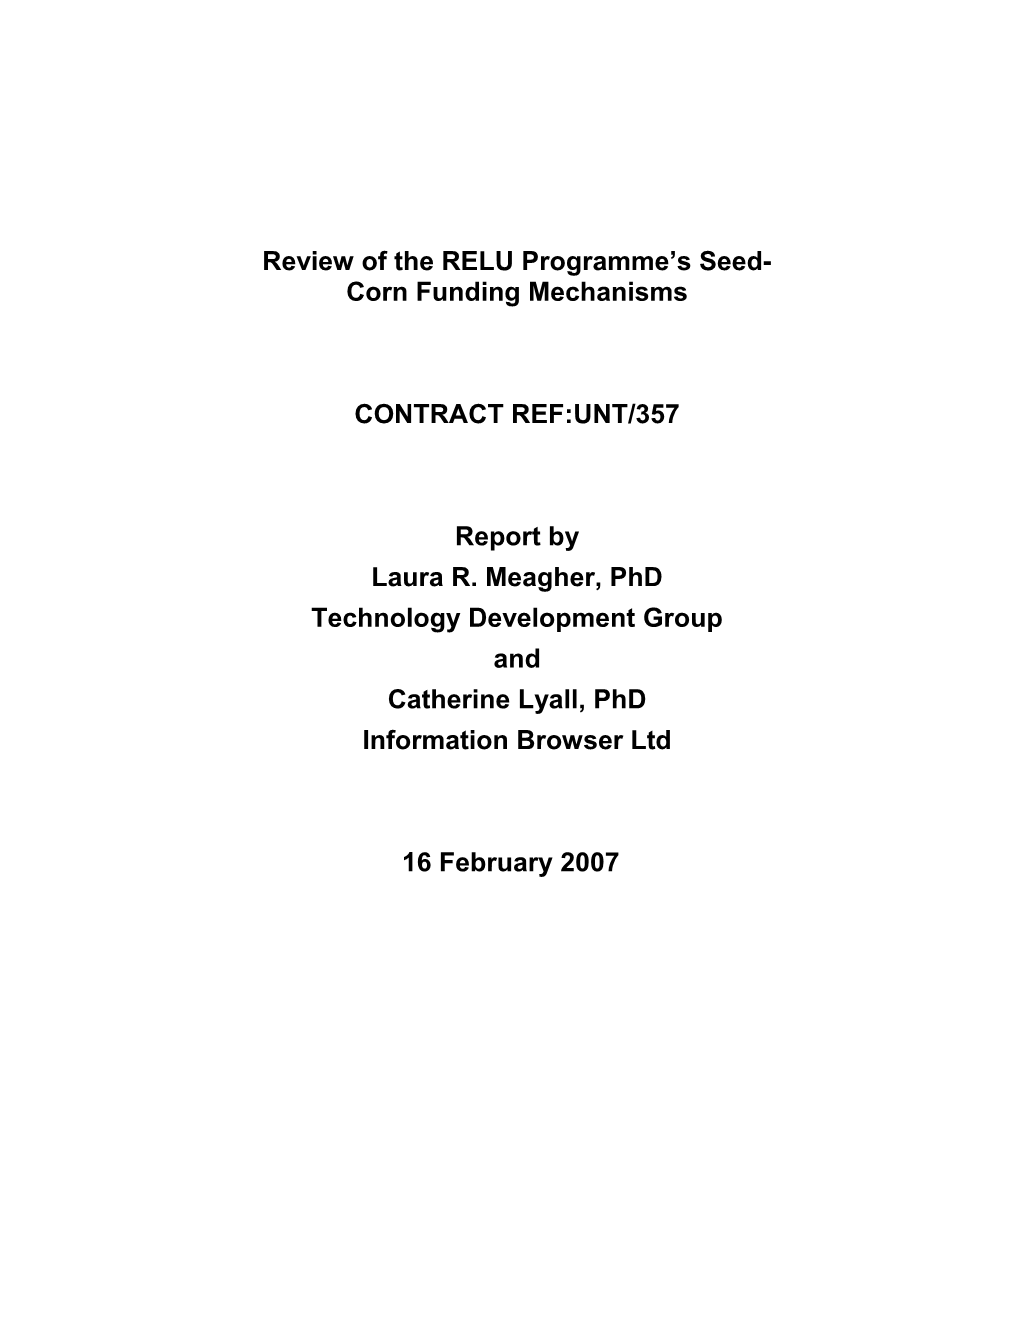 Review of the RELU Programme S Funding Mechanism